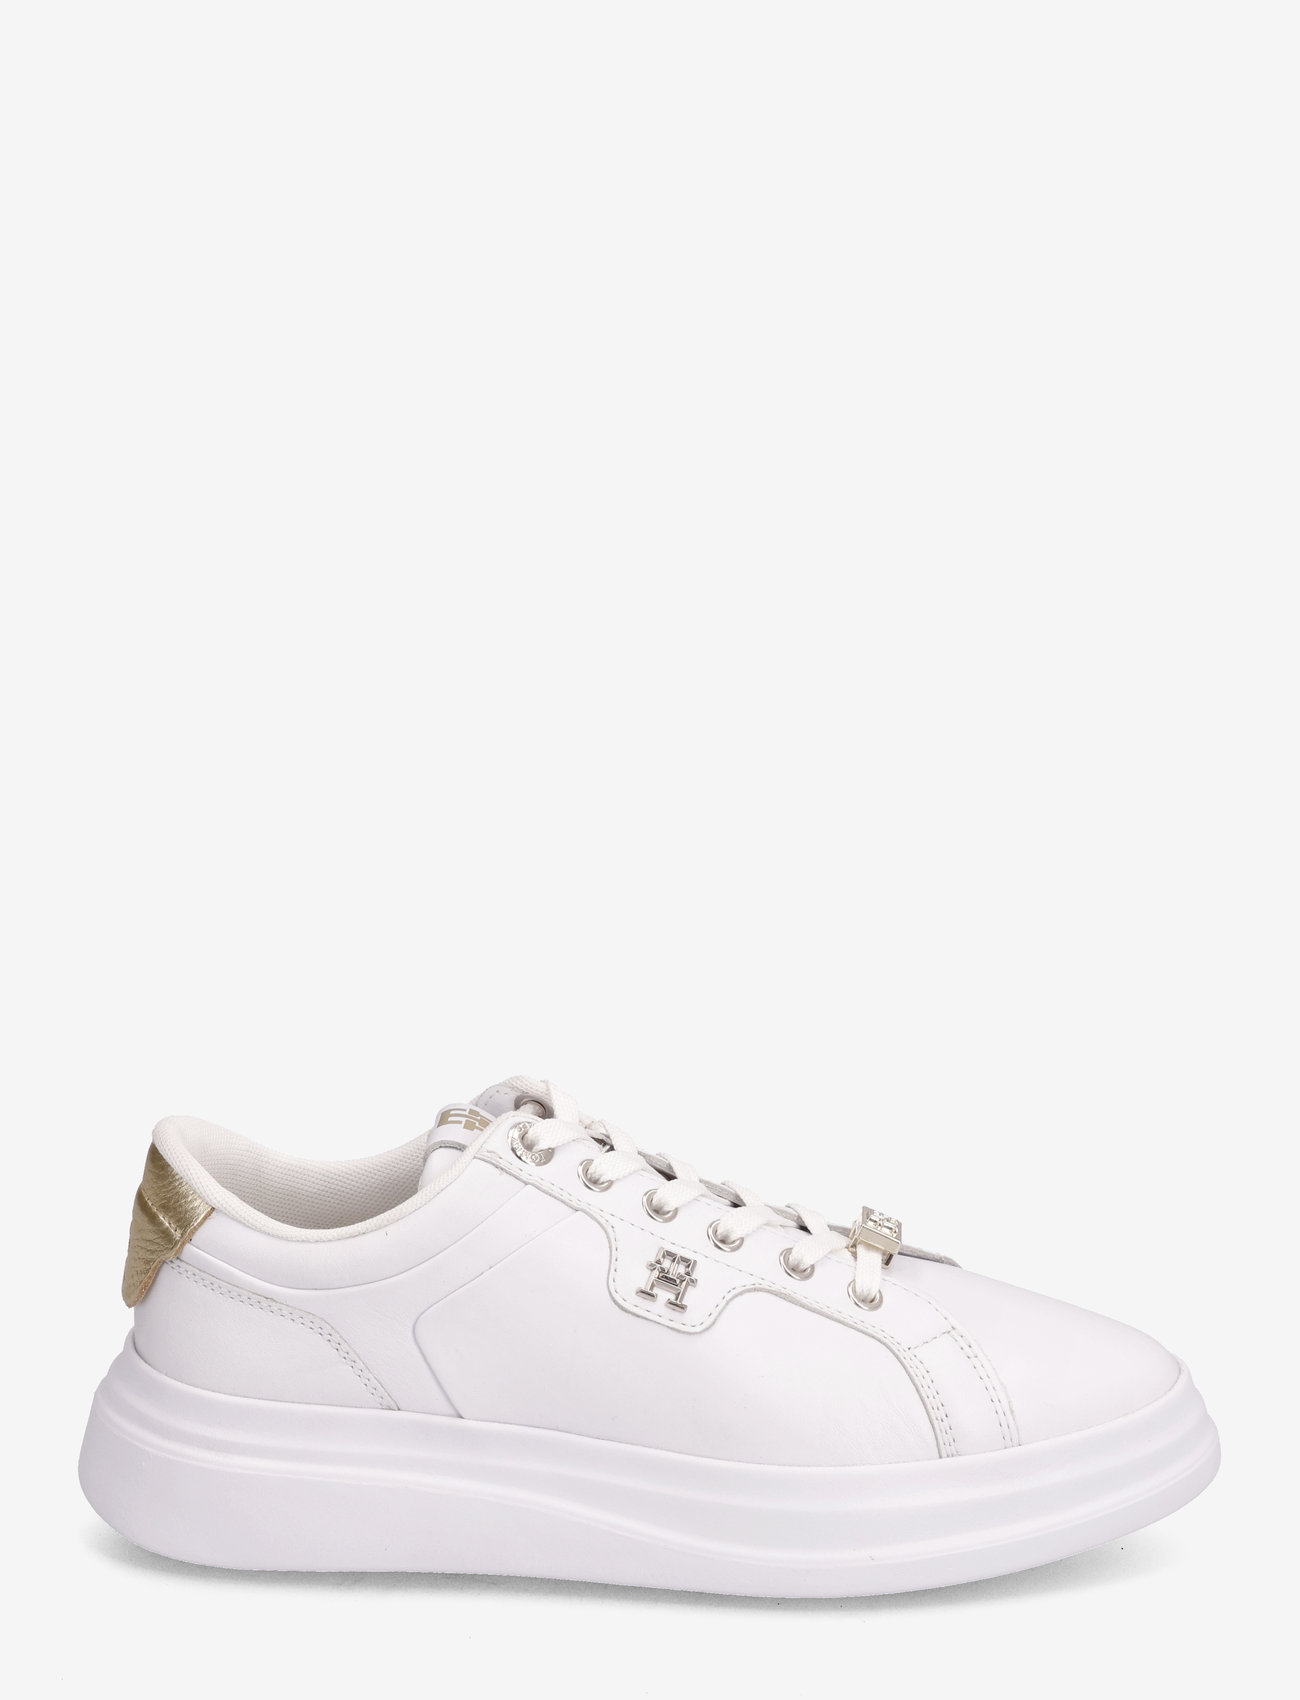 Tommy Hilfiger - POINTY COURT SNEAKER HARDWARE - lave sneakers - white/gold - 1